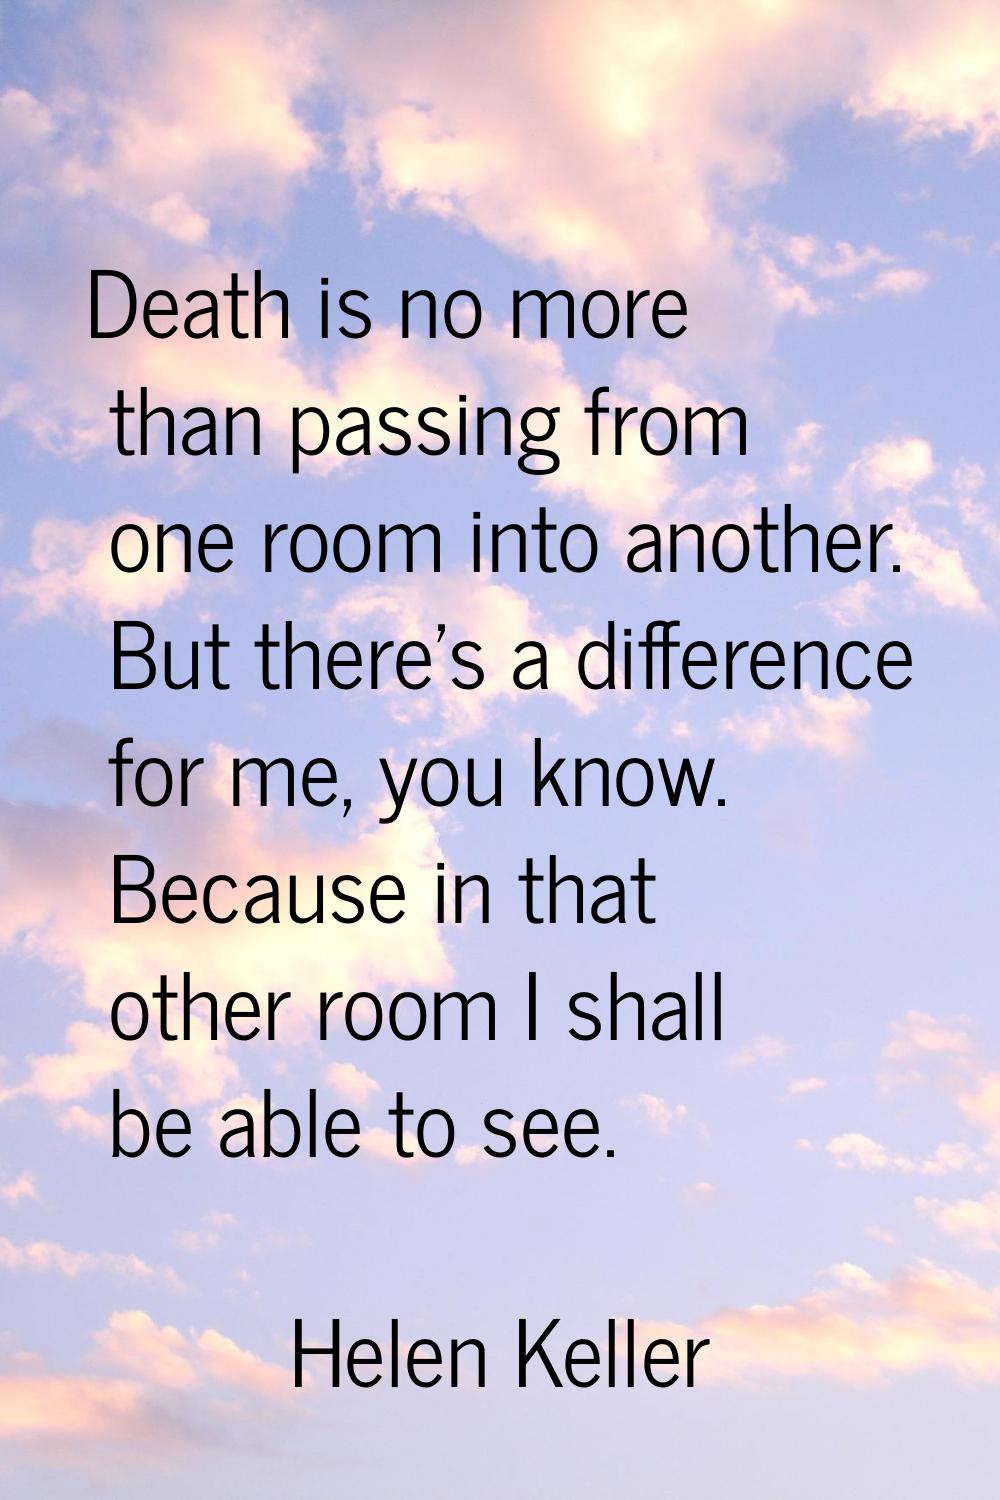 Death is no more than passing from one room into another. But there's a difference for me, you know